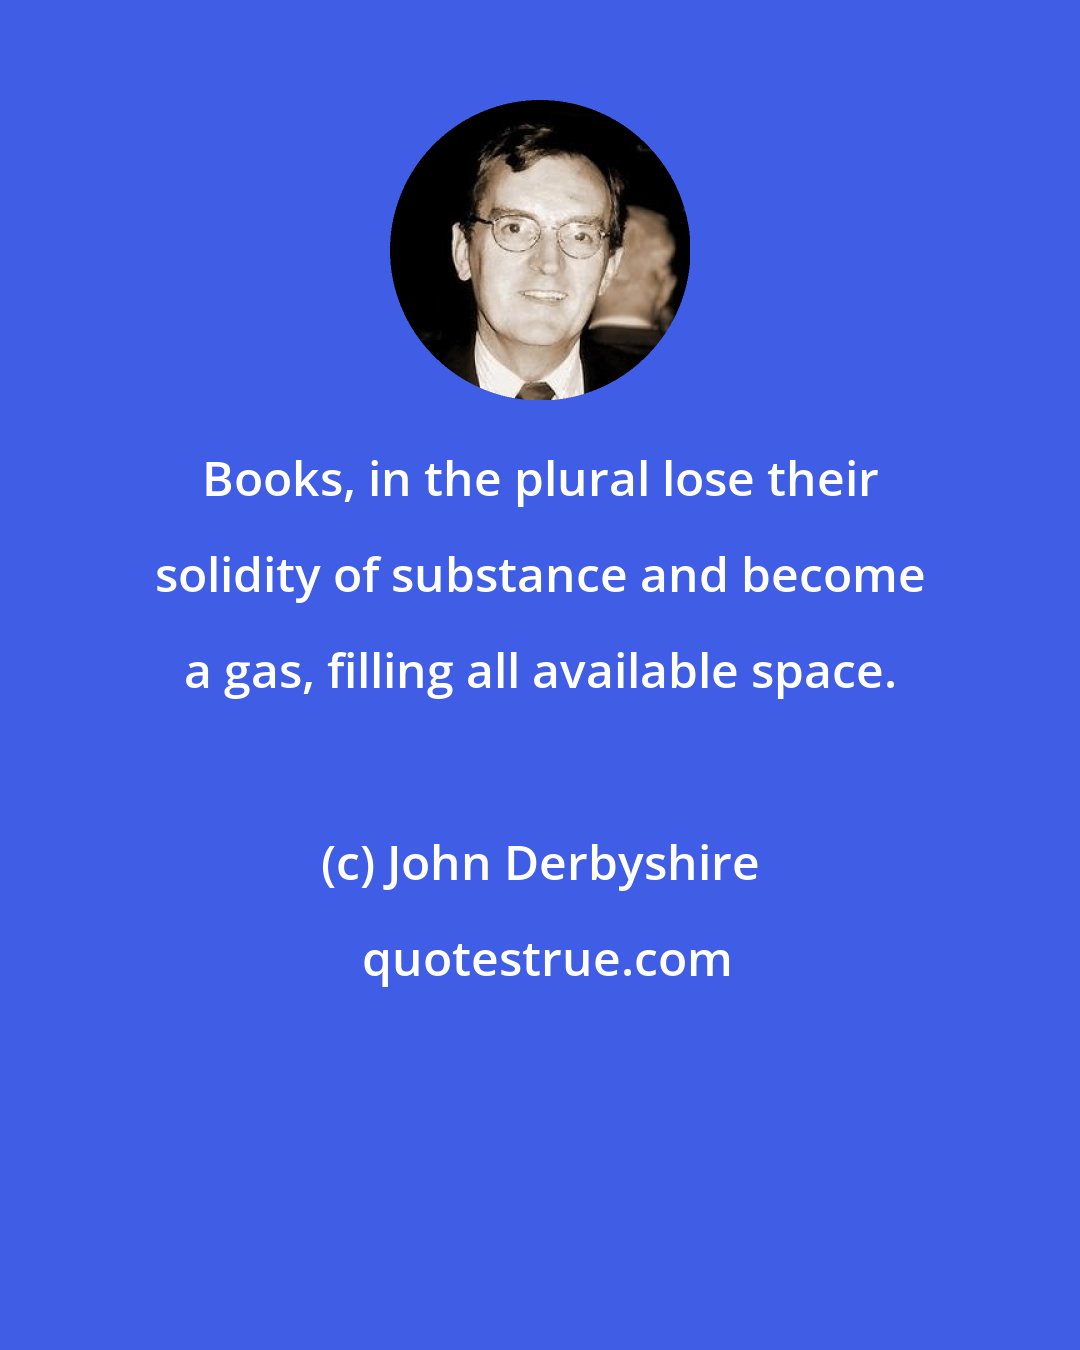 John Derbyshire: Books, in the plural lose their solidity of substance and become a gas, filling all available space.